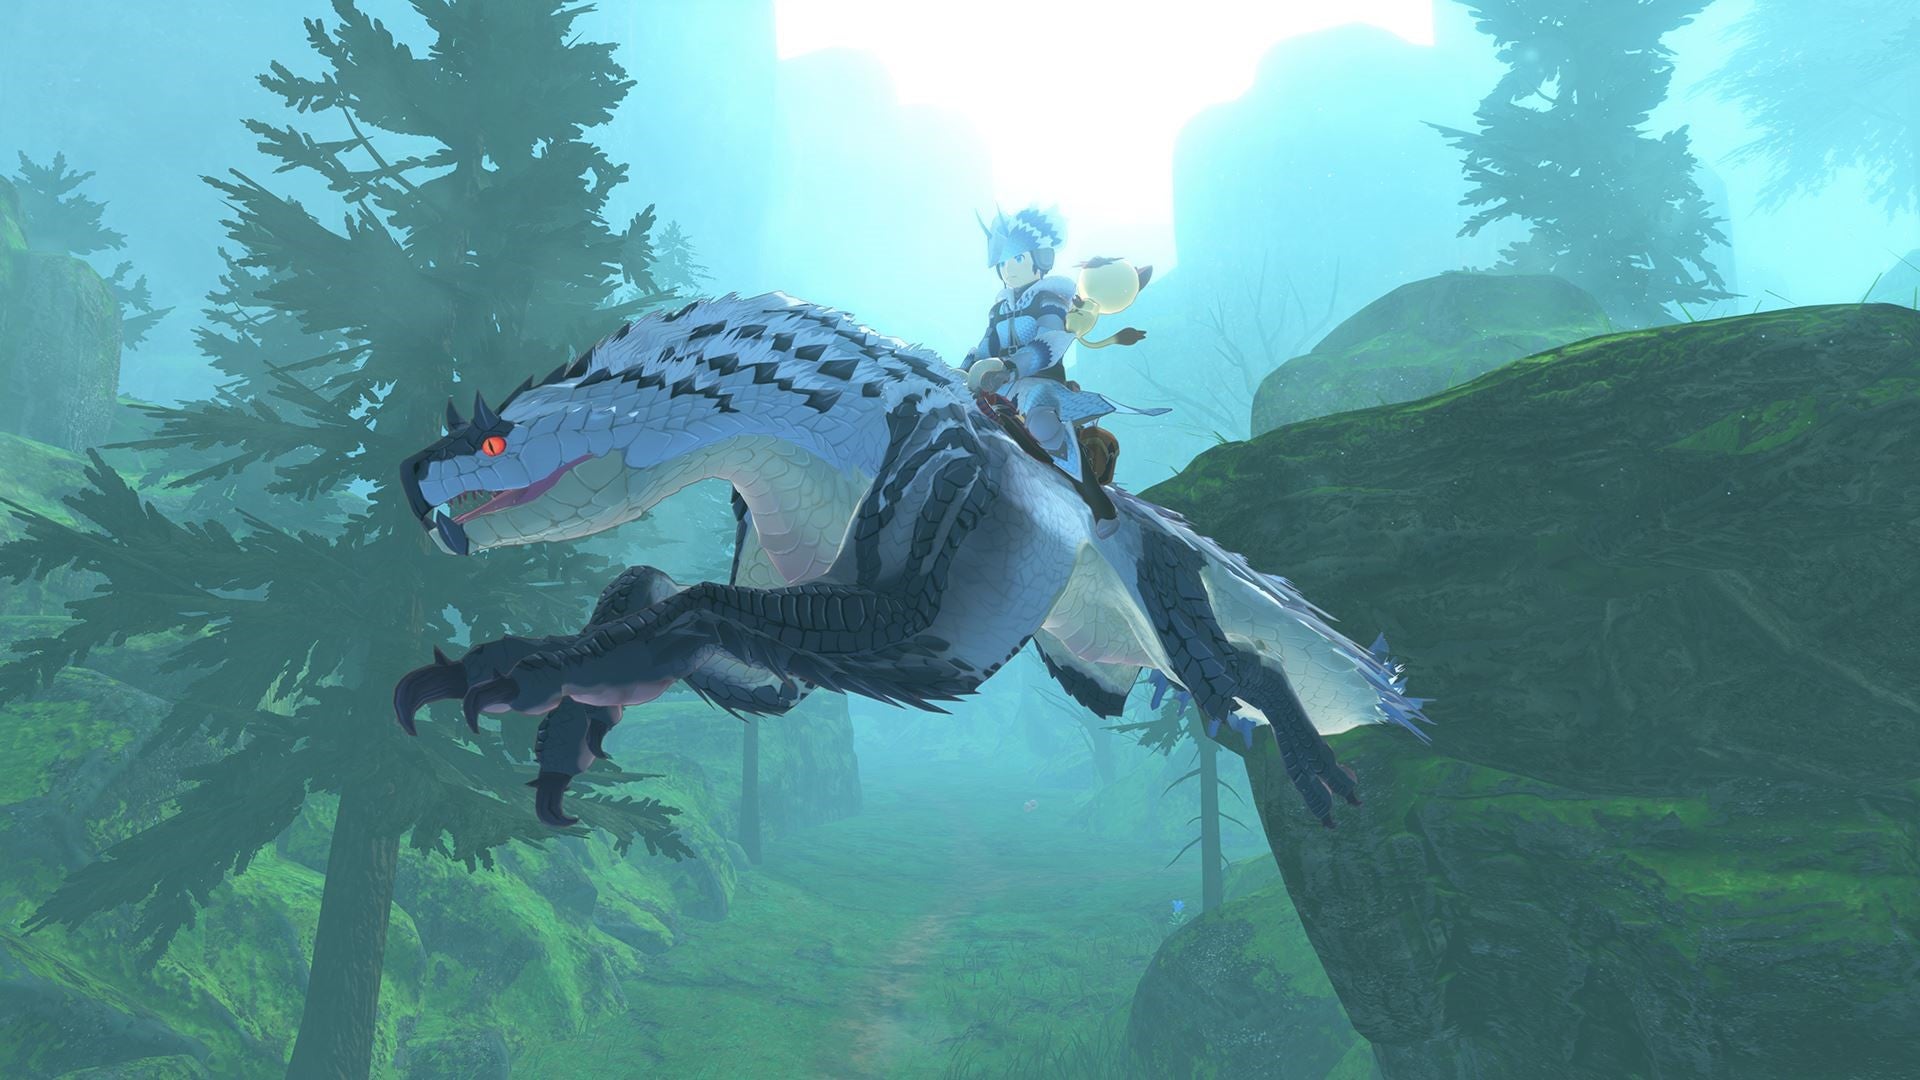 An image from Monster Hunter Stories 2 which shows the player riding on a big lizard.